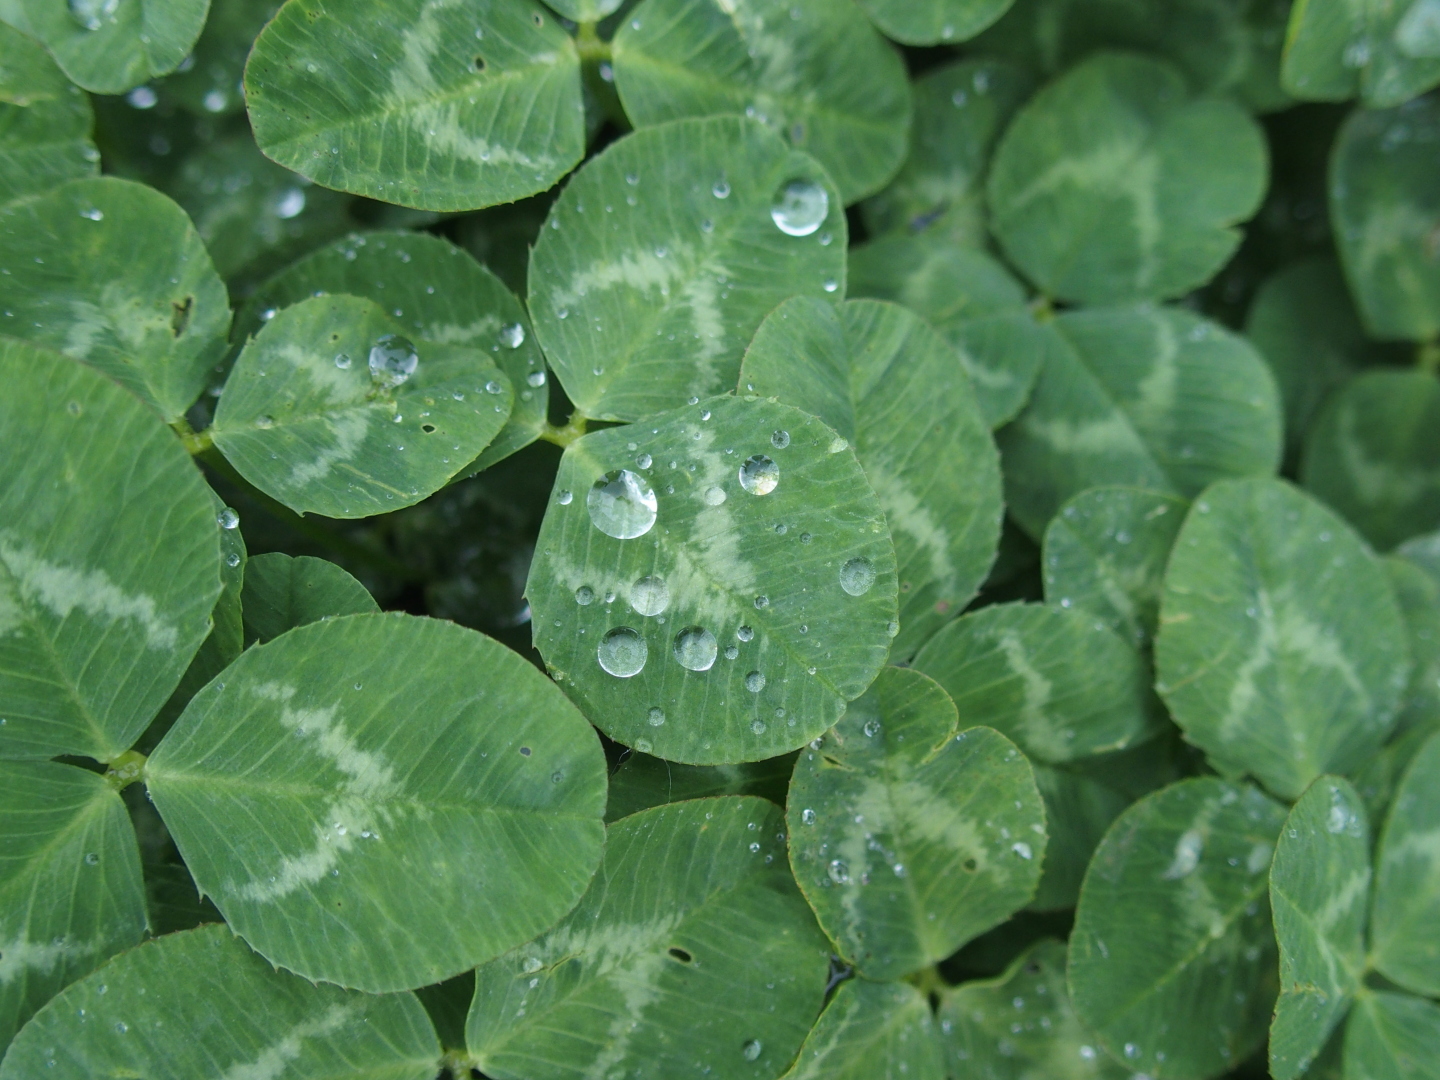 Water droplets on clover.